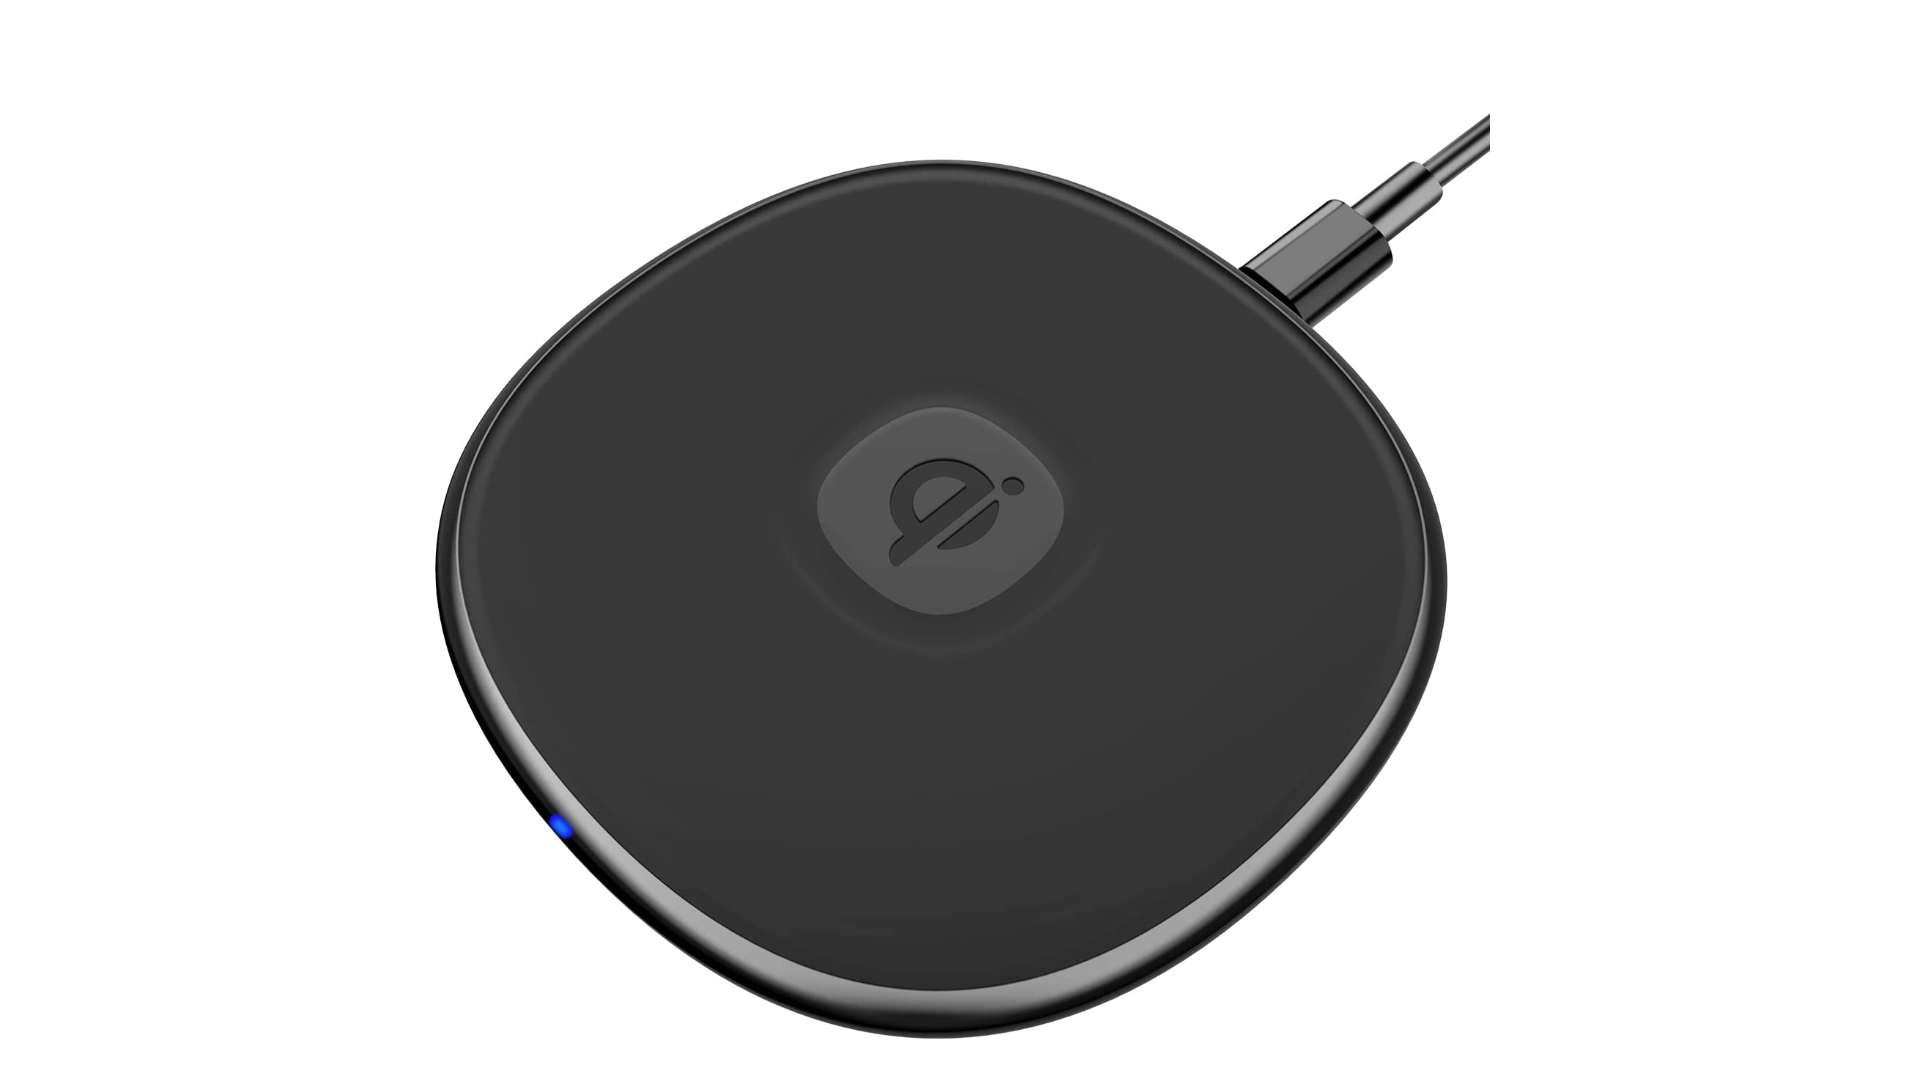 NANAMI fast wireless charger